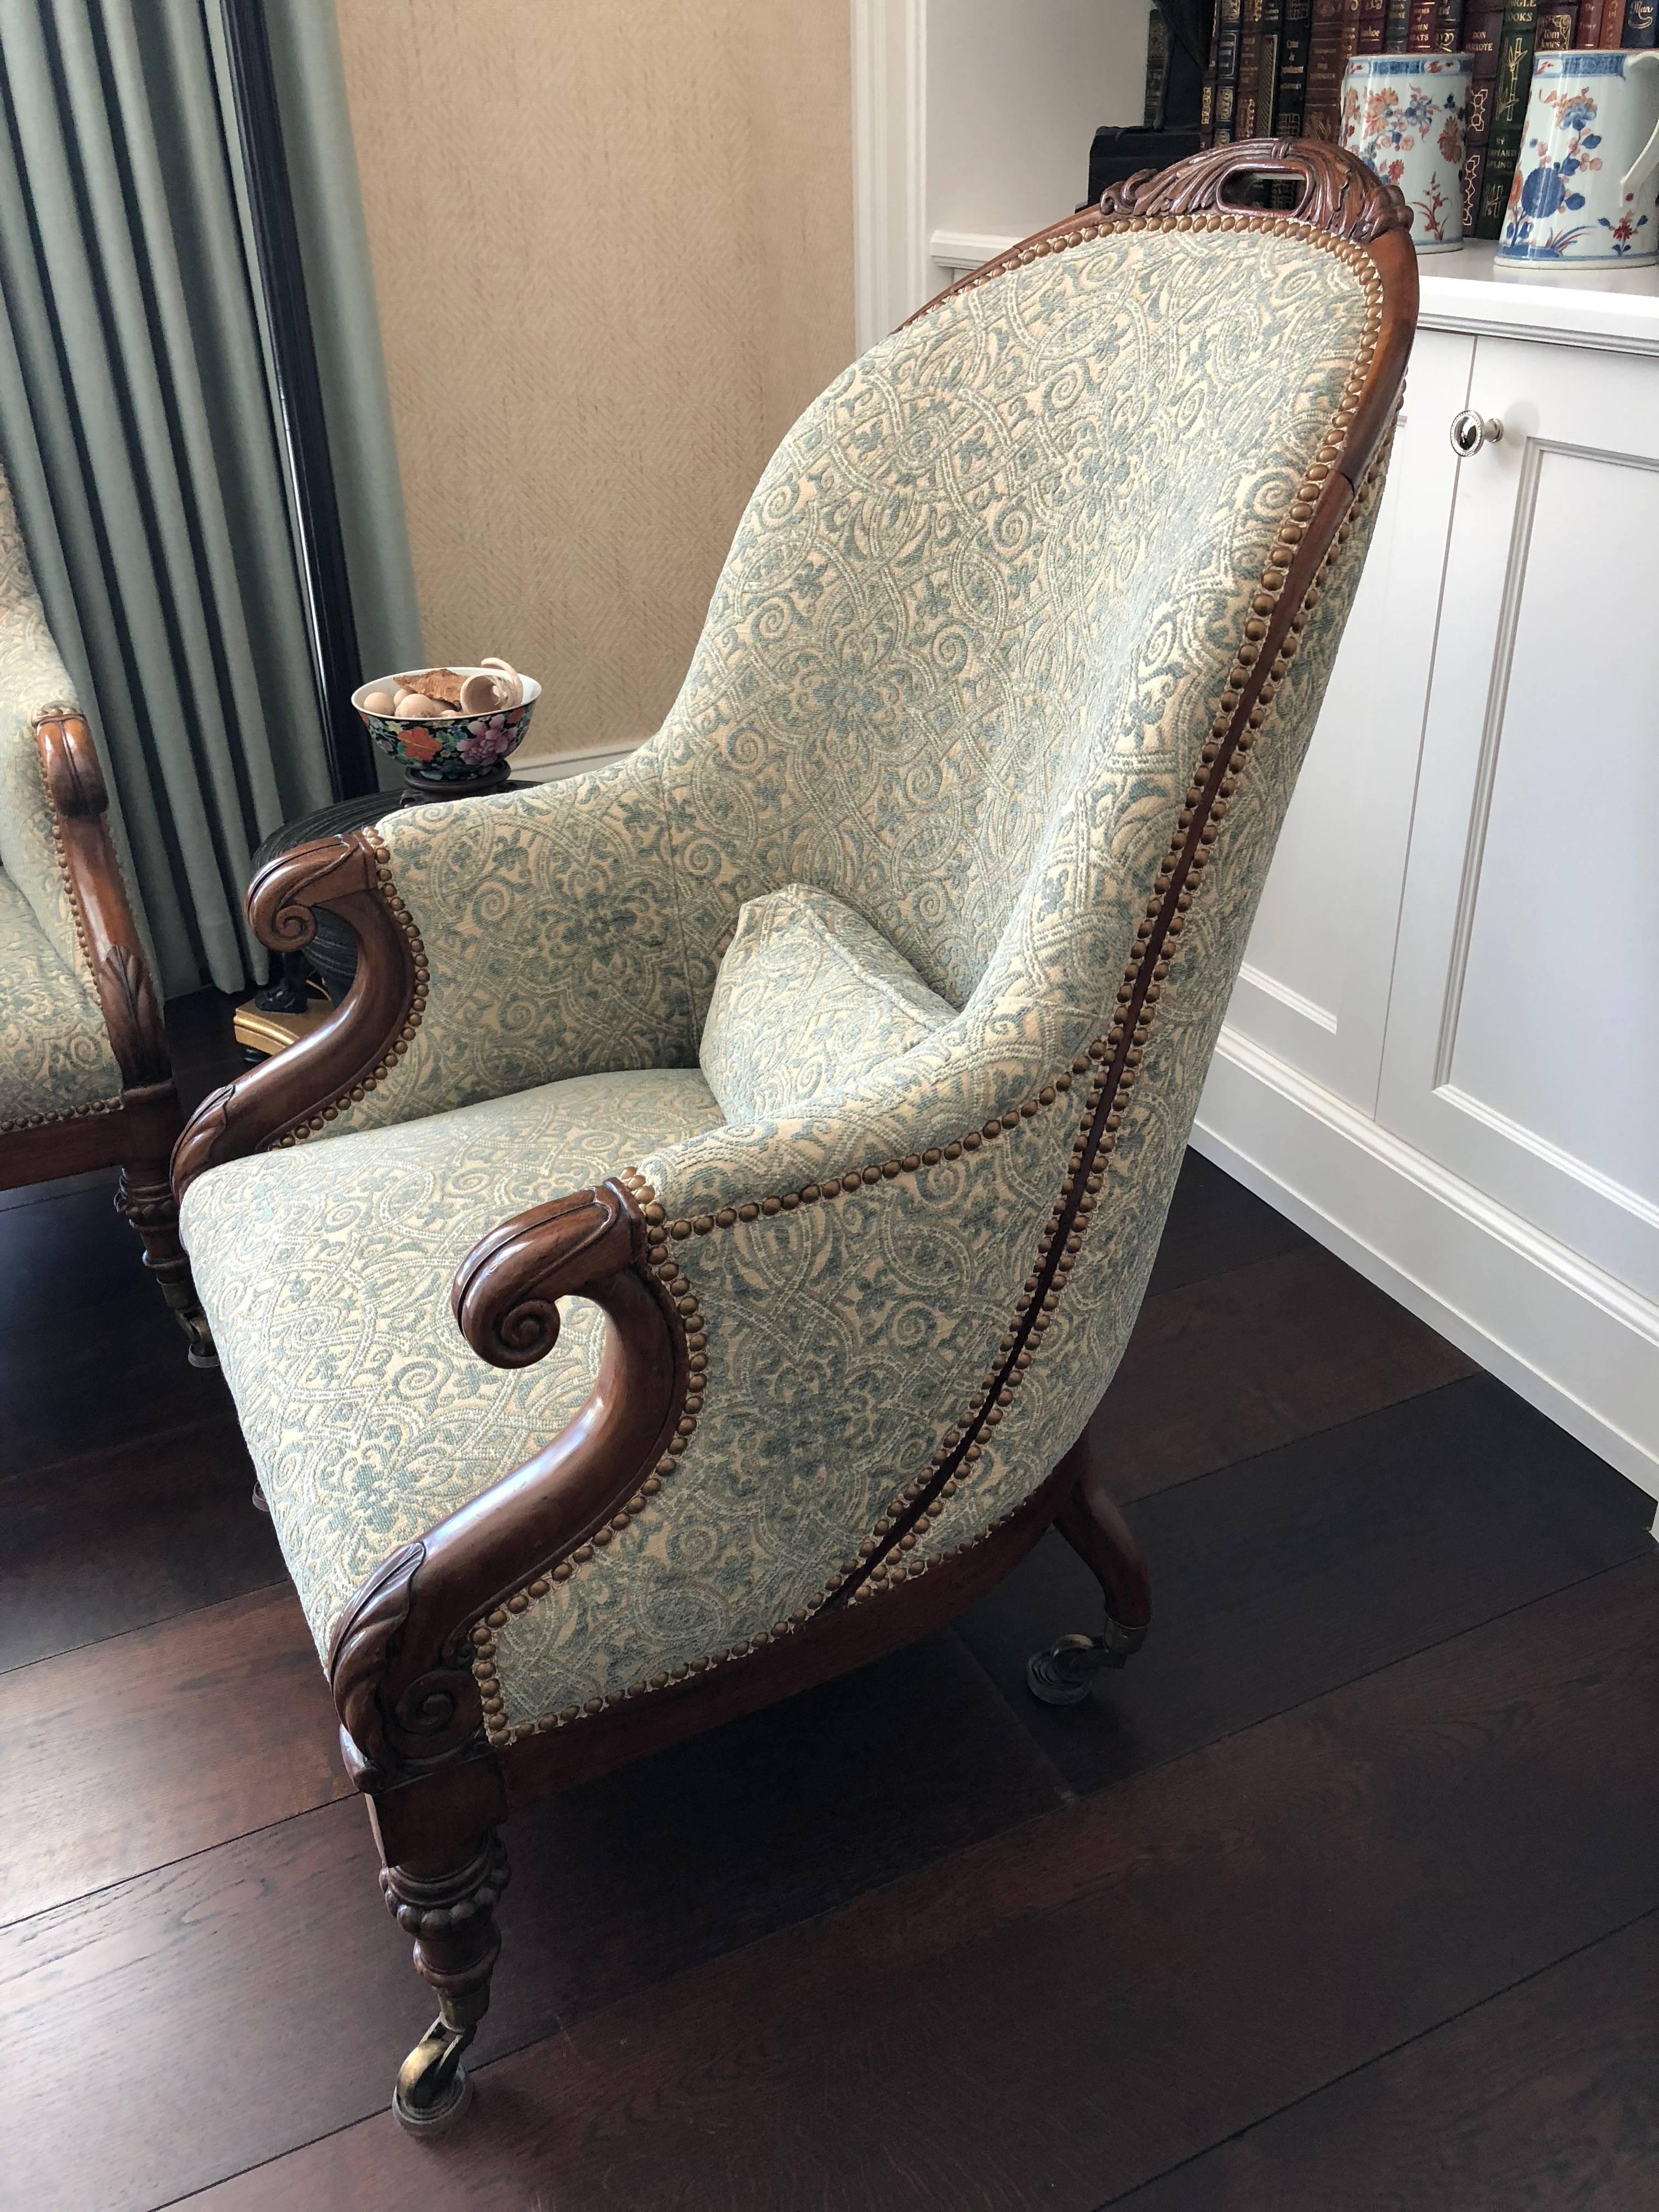 The pair of Regency club armchairs
hand made of mahogany with rounded backs, upholstered with small pillows to match hand-carved hand rests and their supports on turned short feet brass casters purchased from Florian Papp, New York.